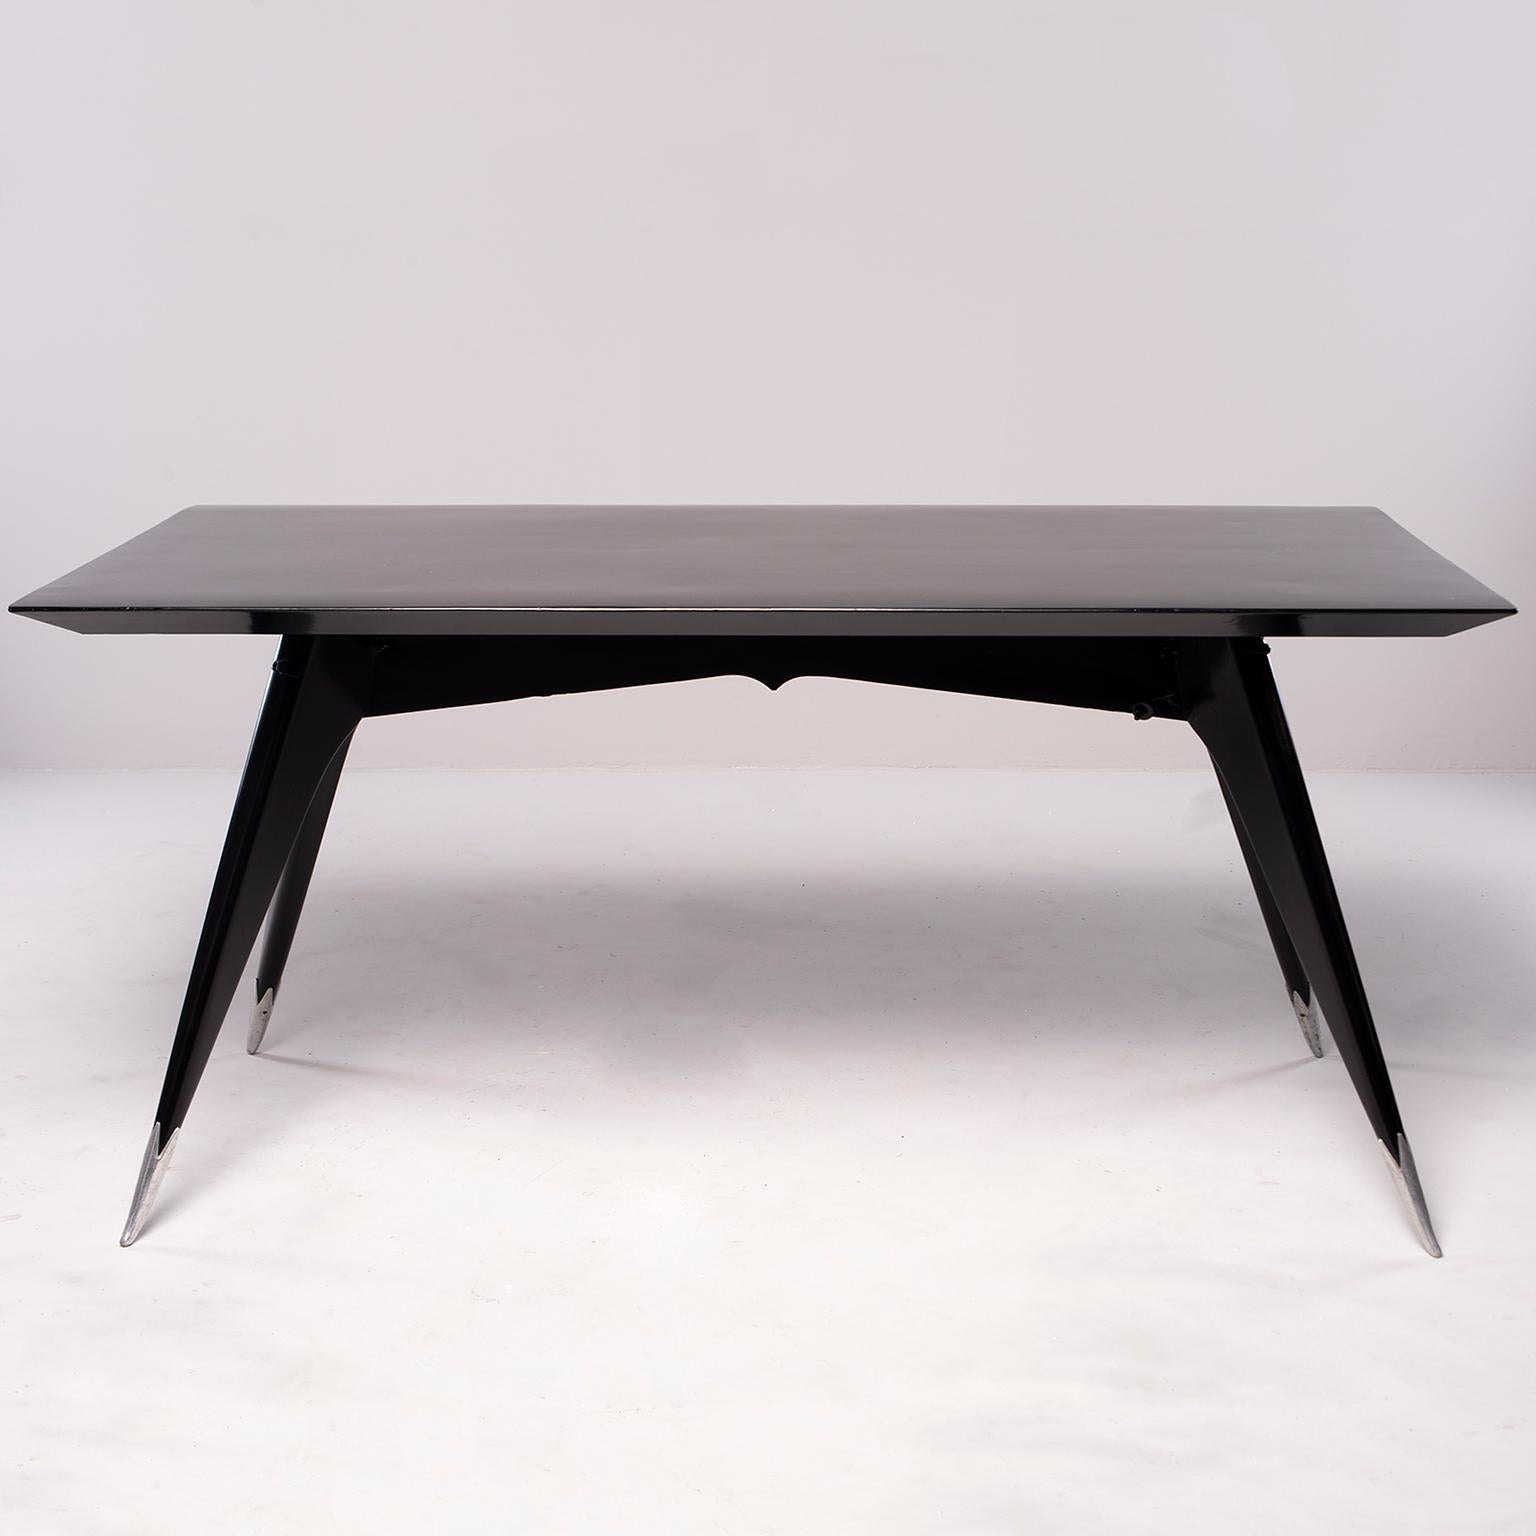 Midcentury Italian Ebonized Dining Table with Tapered Legs and Silver Leg Caps 2